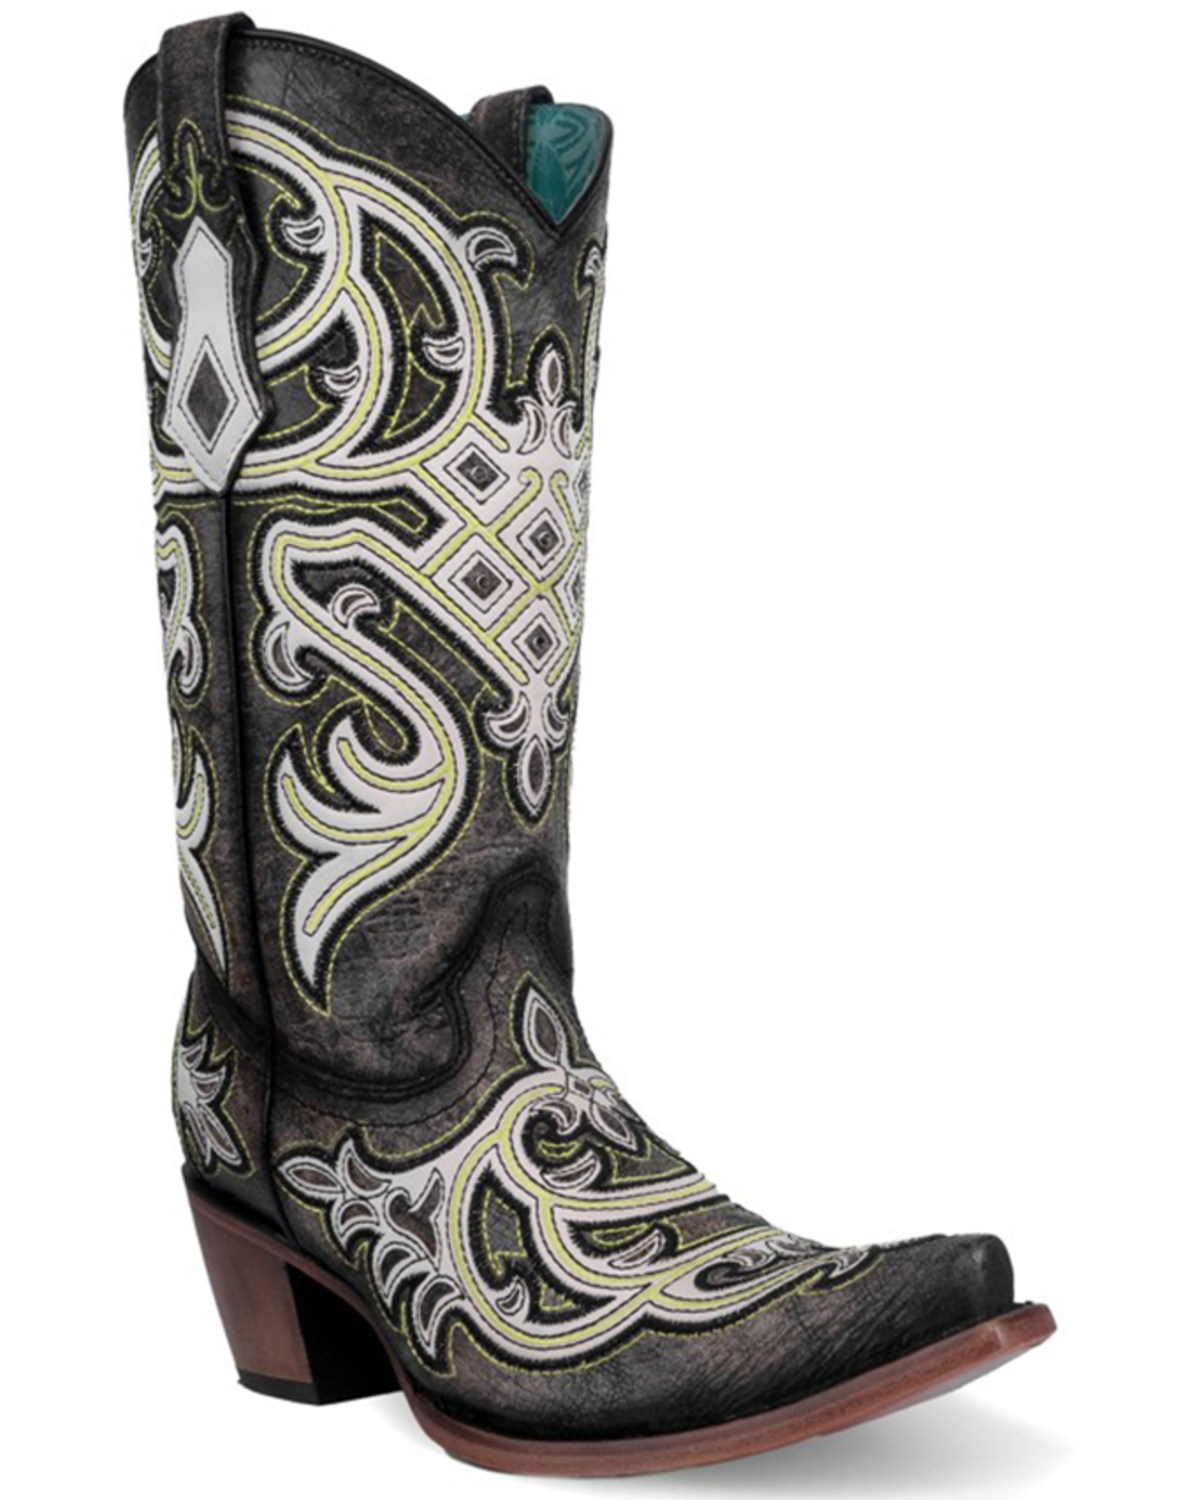 Corral Women's Embroidered Neon Blacklight Western Boots - Snip Toe